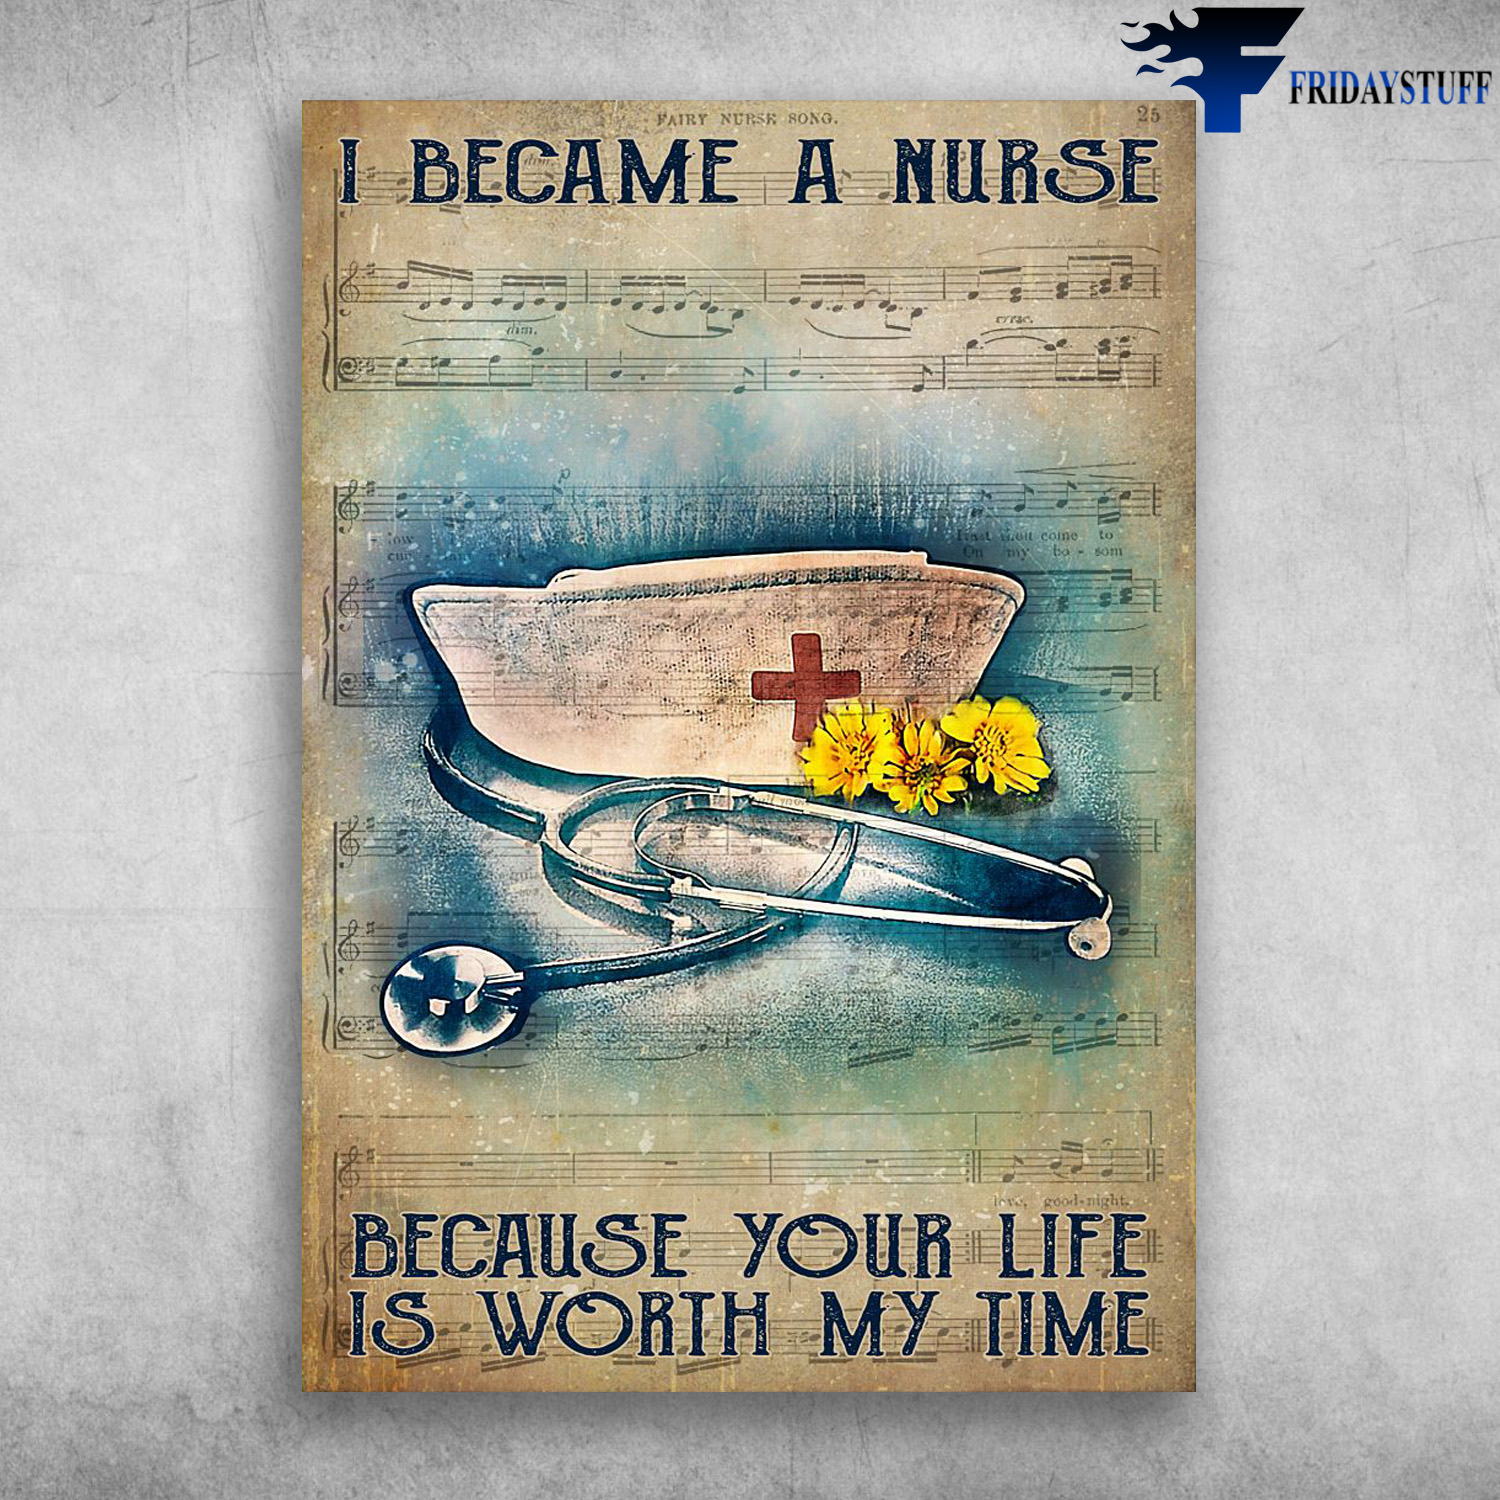 Nurse And Stethoscope, Music Sheet - I Became A Nurse, Because Your Life, Is Worth My Time